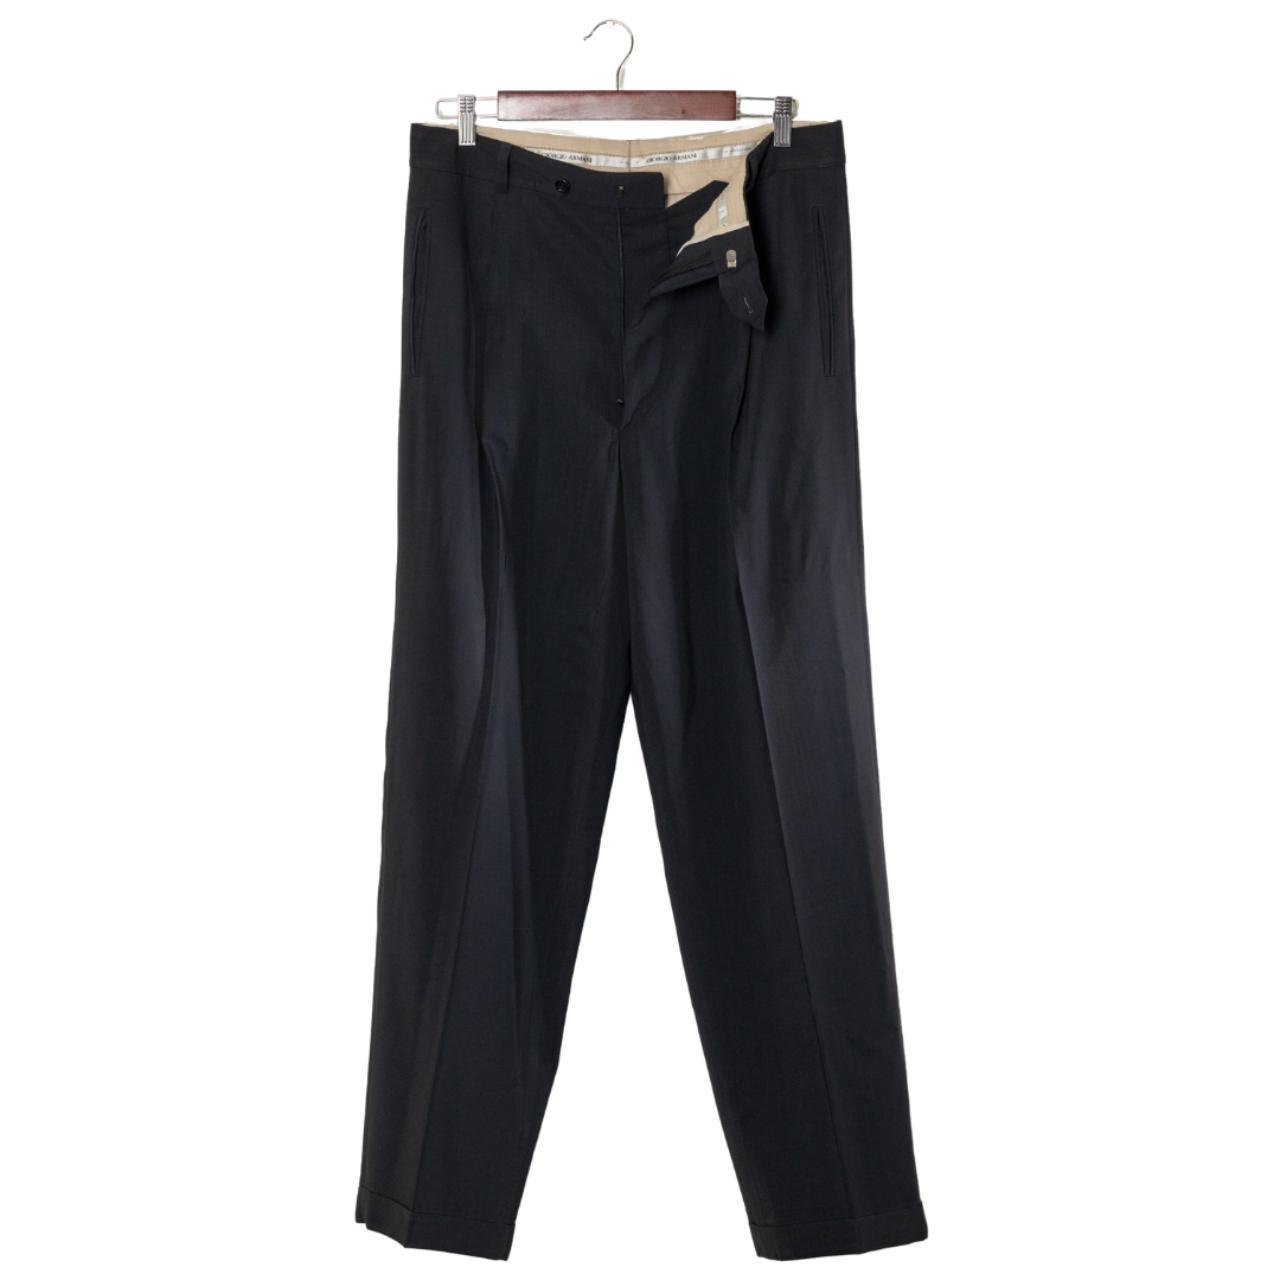 Armani Men's Black and Navy Trousers (3)